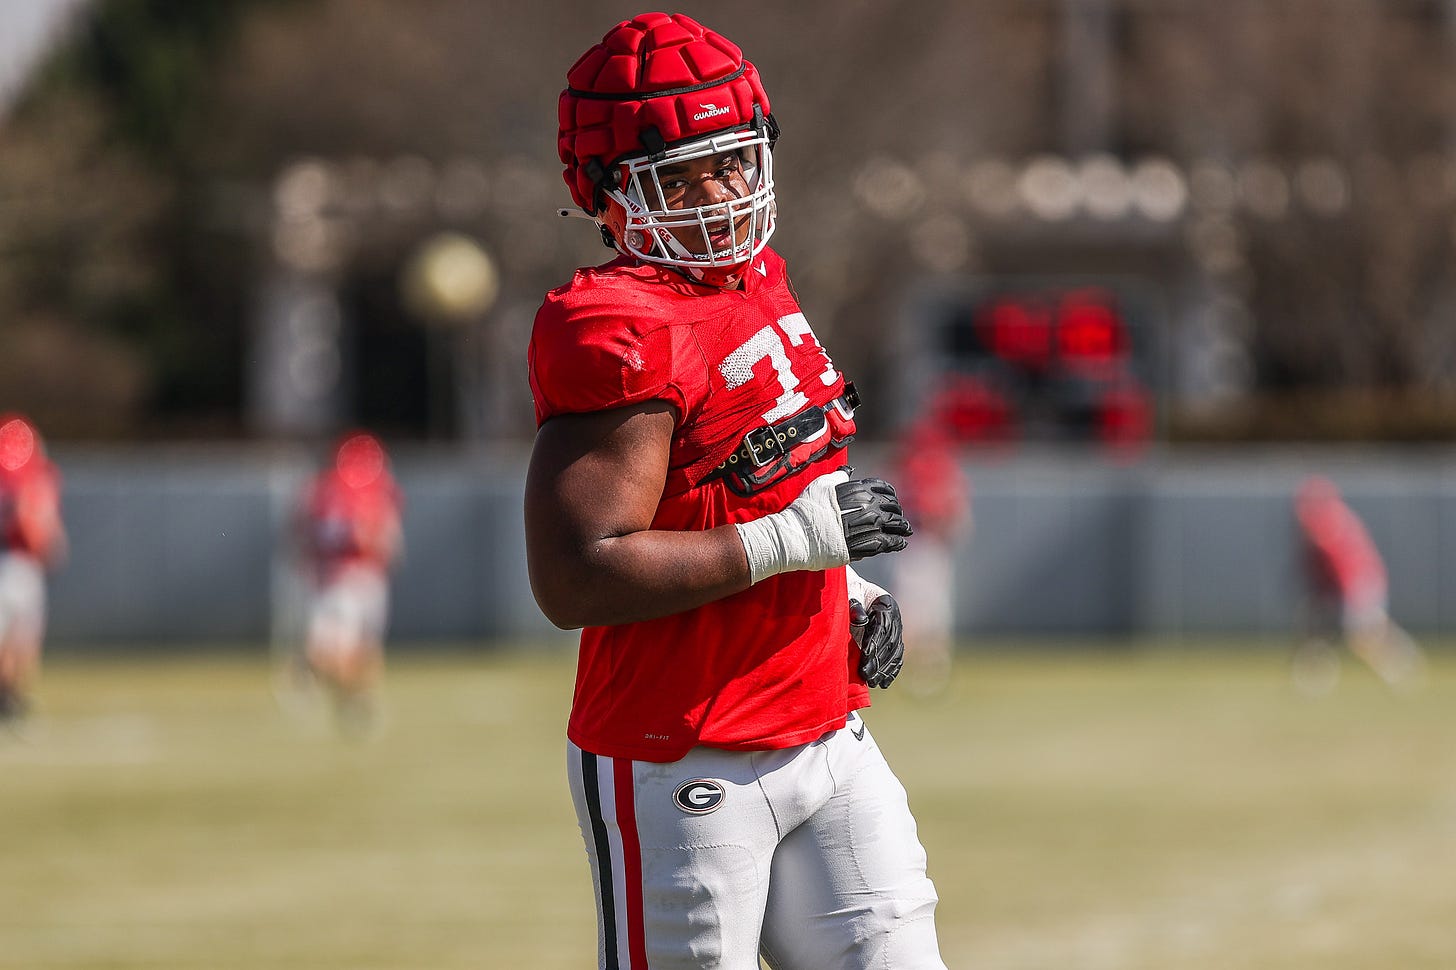 Georgia offensive lineman Devin Willock (77) during the Bulldogs’ practice session in Athens, Ga., on Tuesday, March 29, 2022. (Photo by Mackenzie Miles)